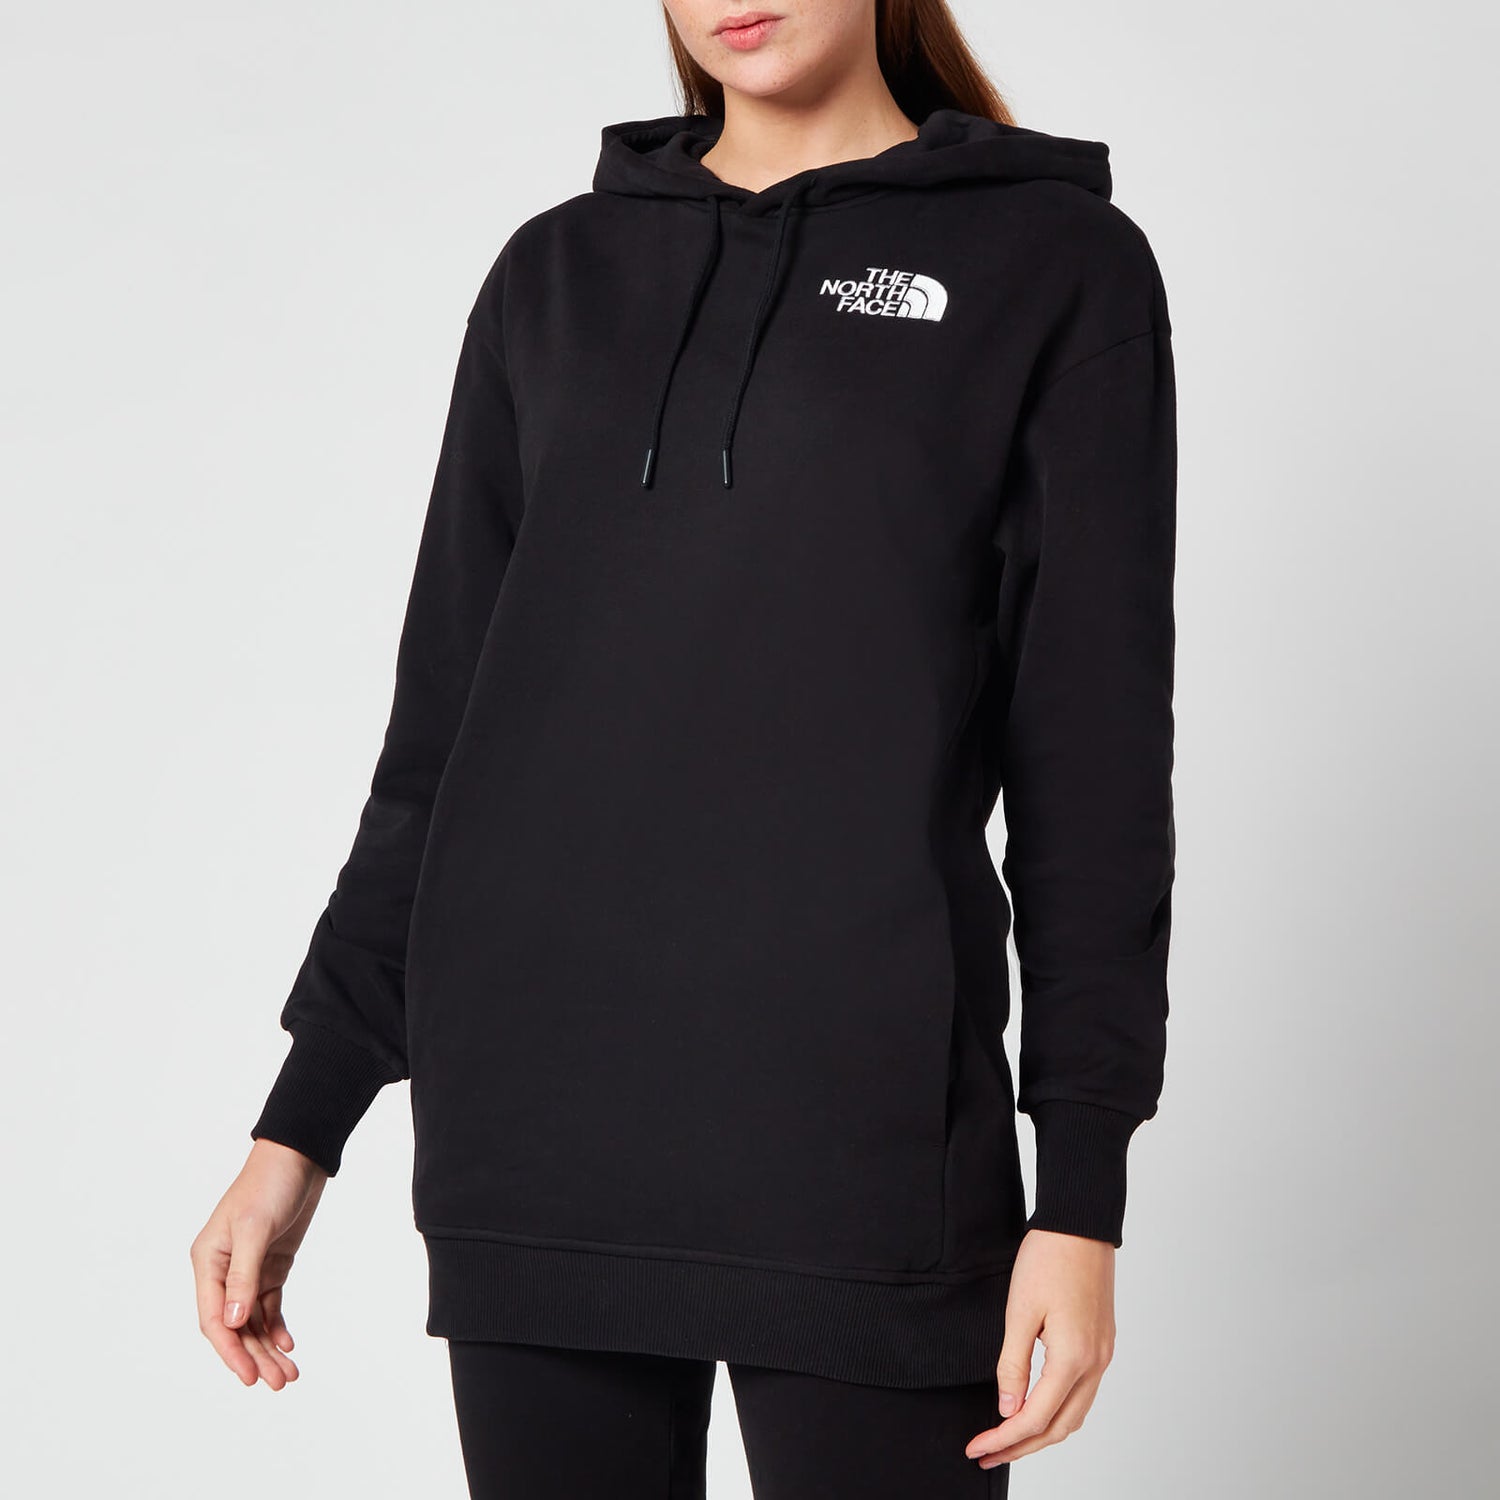 The North Face Women's Oversized Hoodie - Black